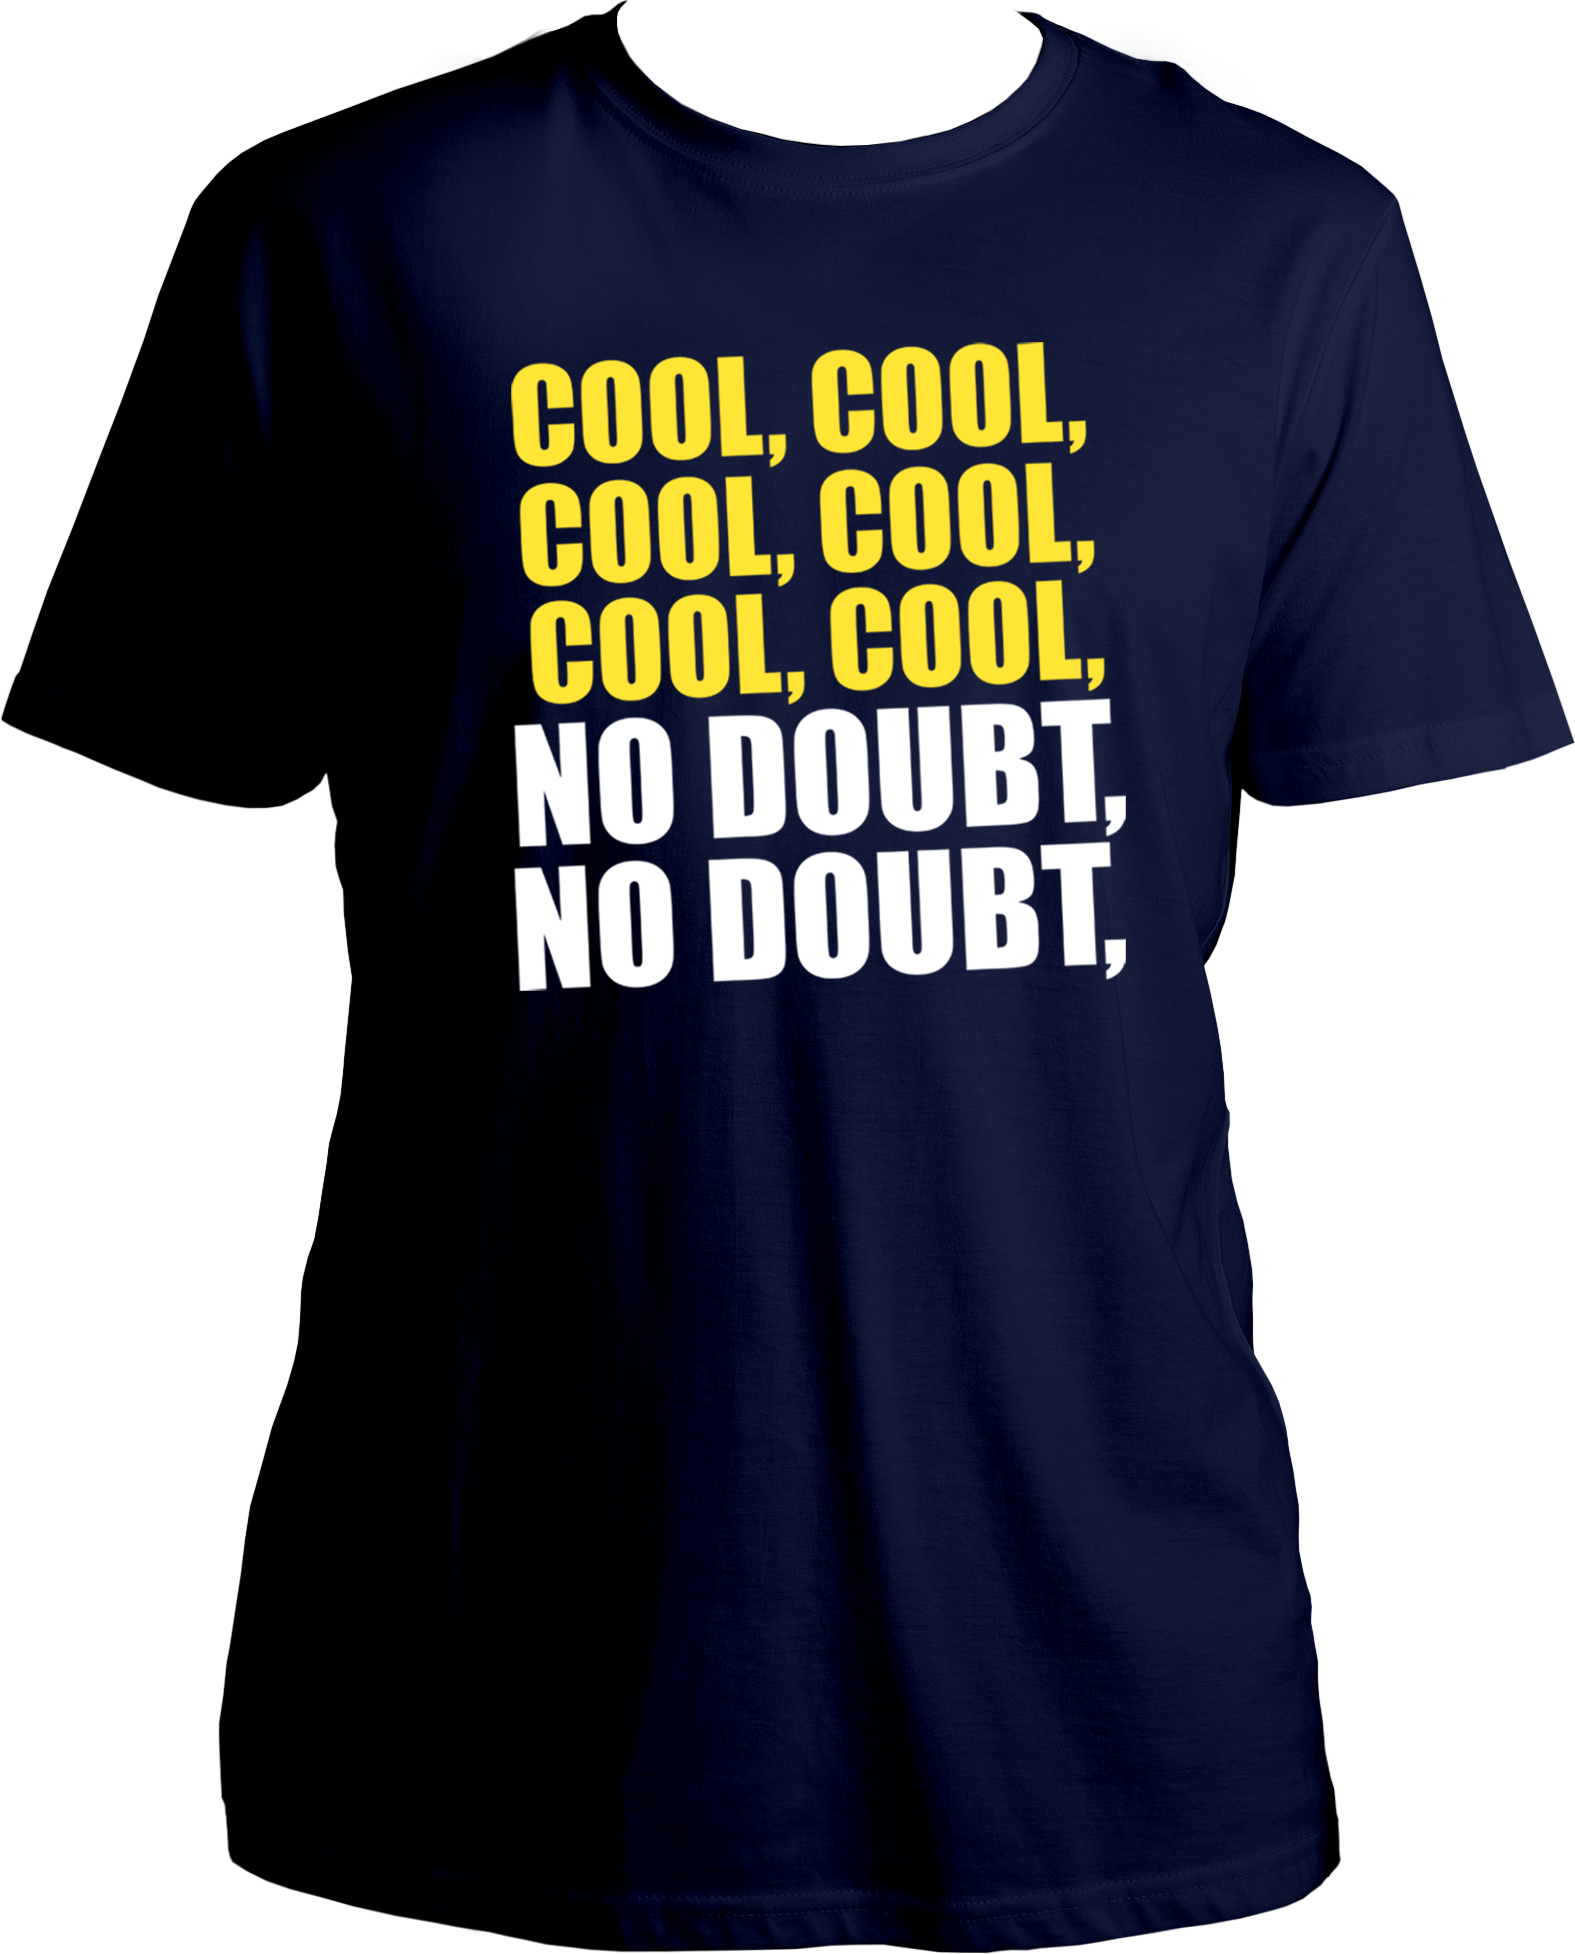 Step into the hilarious world of Brooklyn Nine-Nine with our unisex cotton T-shirt featuring the iconic "Cool, Cool, Cool, Cool, Cool, Cool, No Doubt, No Doubt" incident! This tee is not just a garment; it's a piece of comedy gold that only true fans will appreciate.